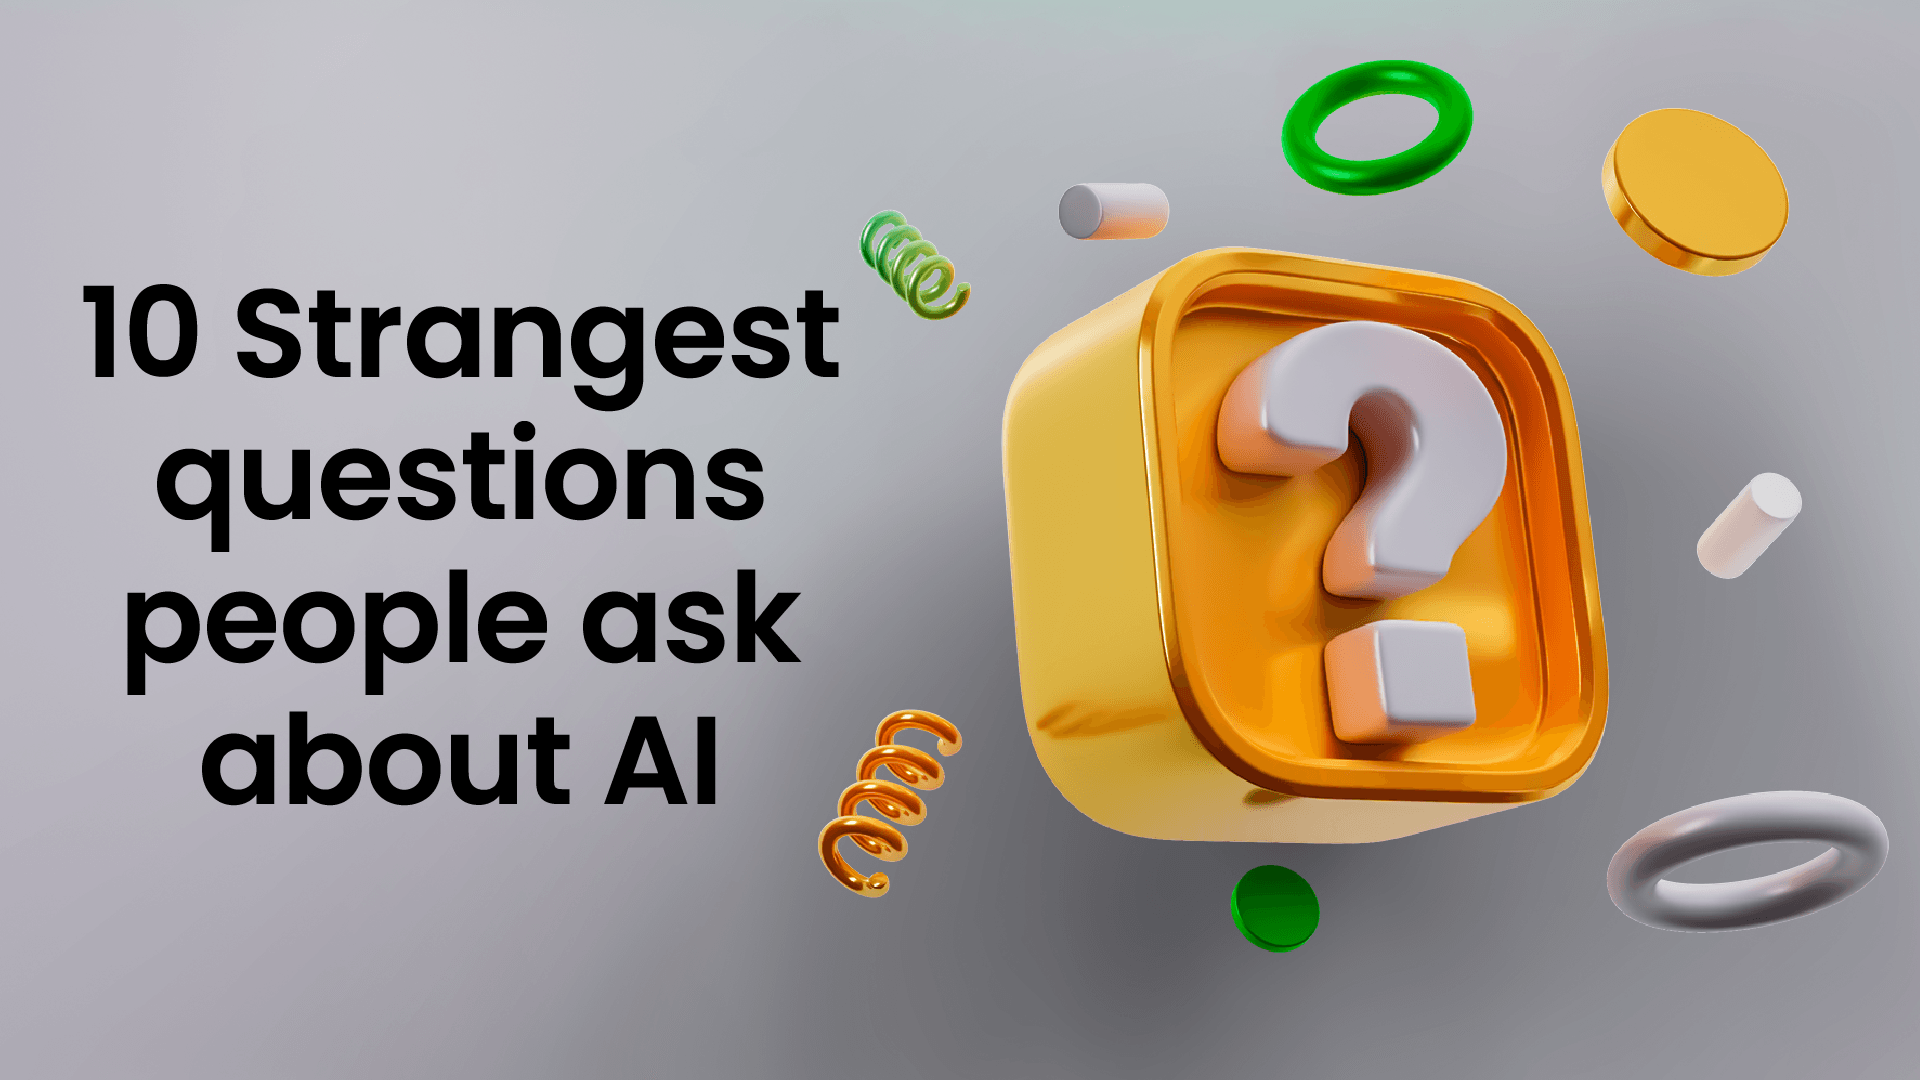 10 Strangest questions people ask about AI